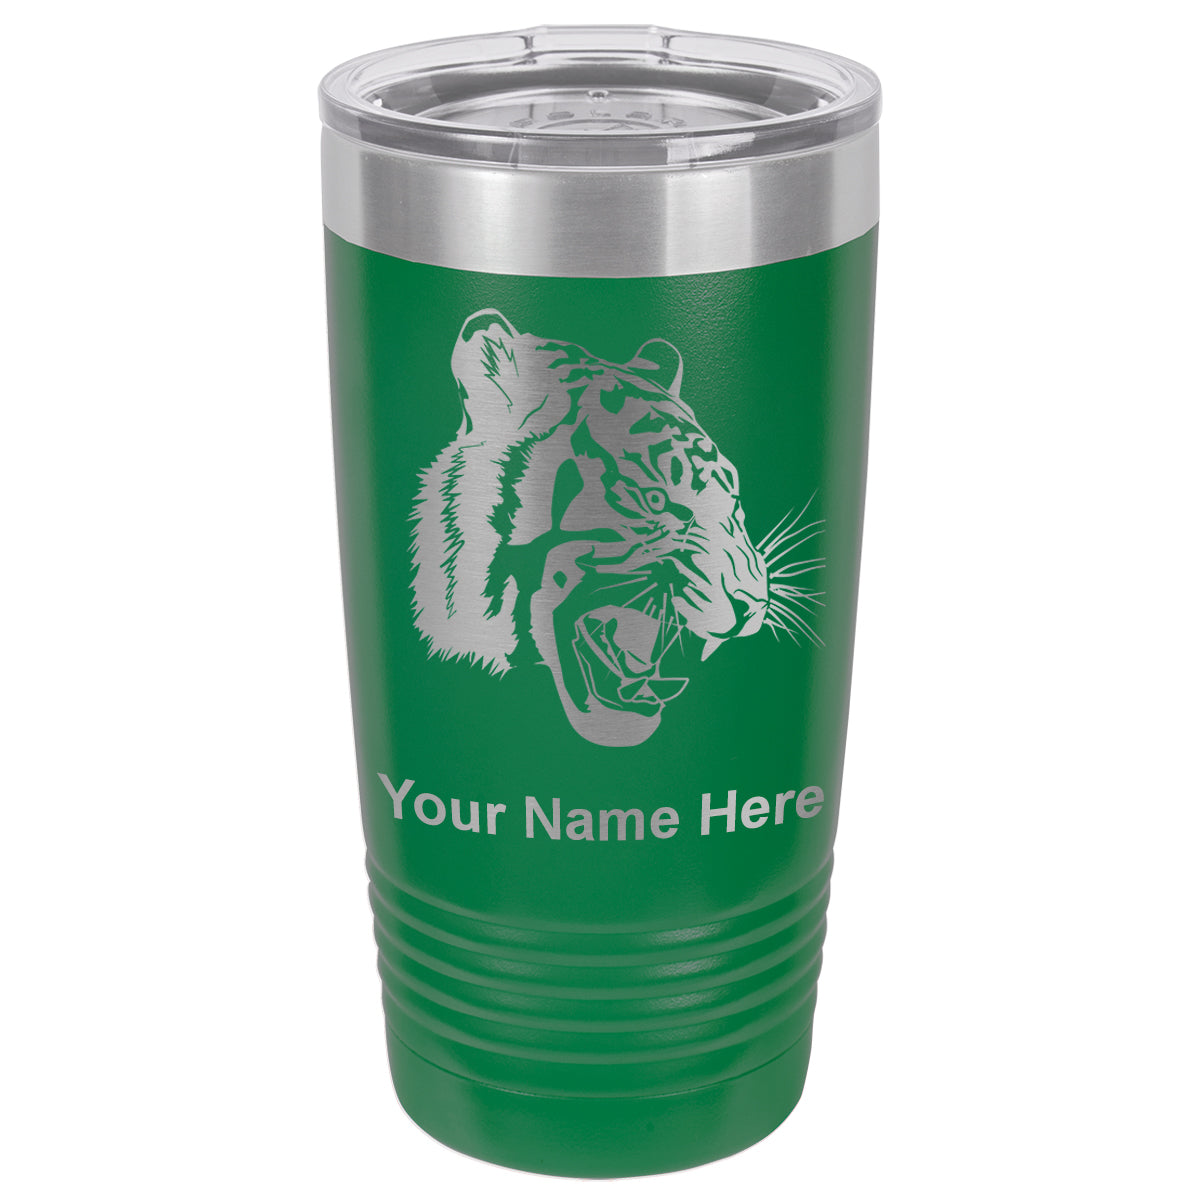 20oz Vacuum Insulated Tumbler Mug, Tiger Head, Personalized Engraving Included